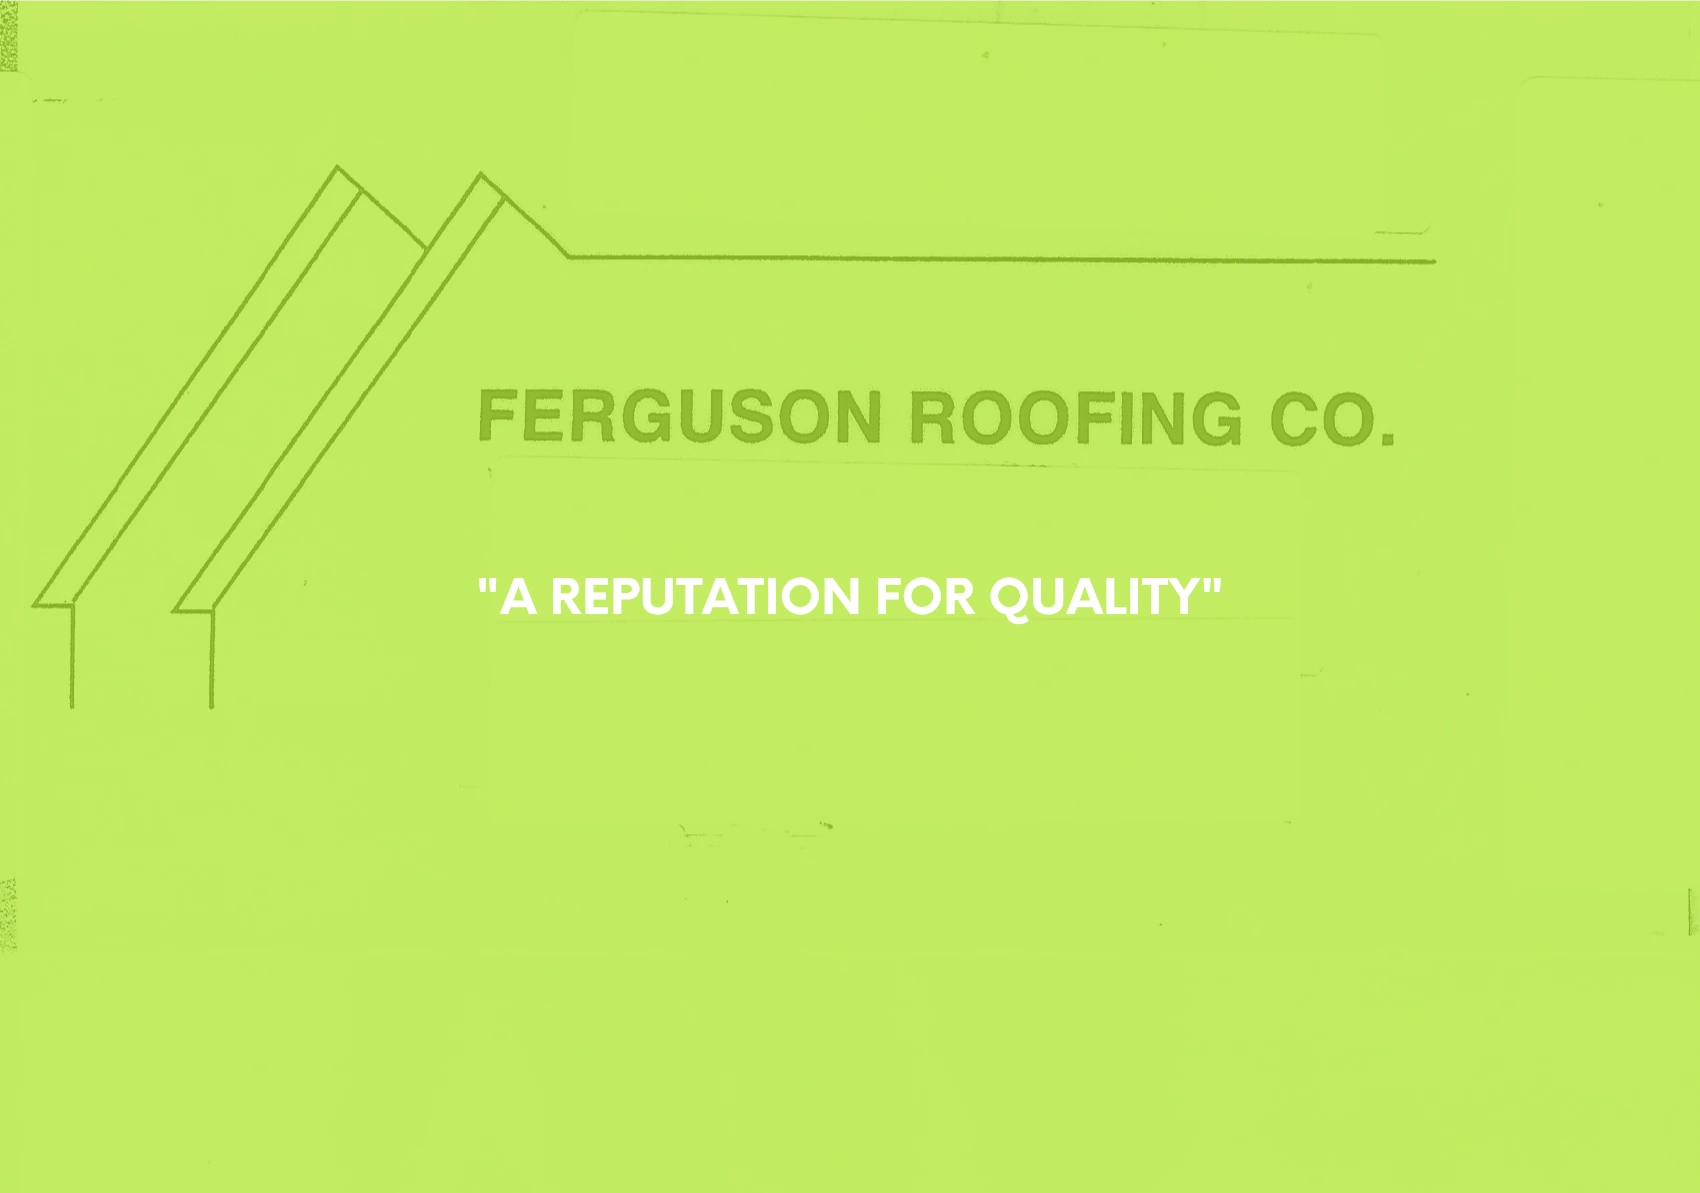 Logo for Roofing Co.